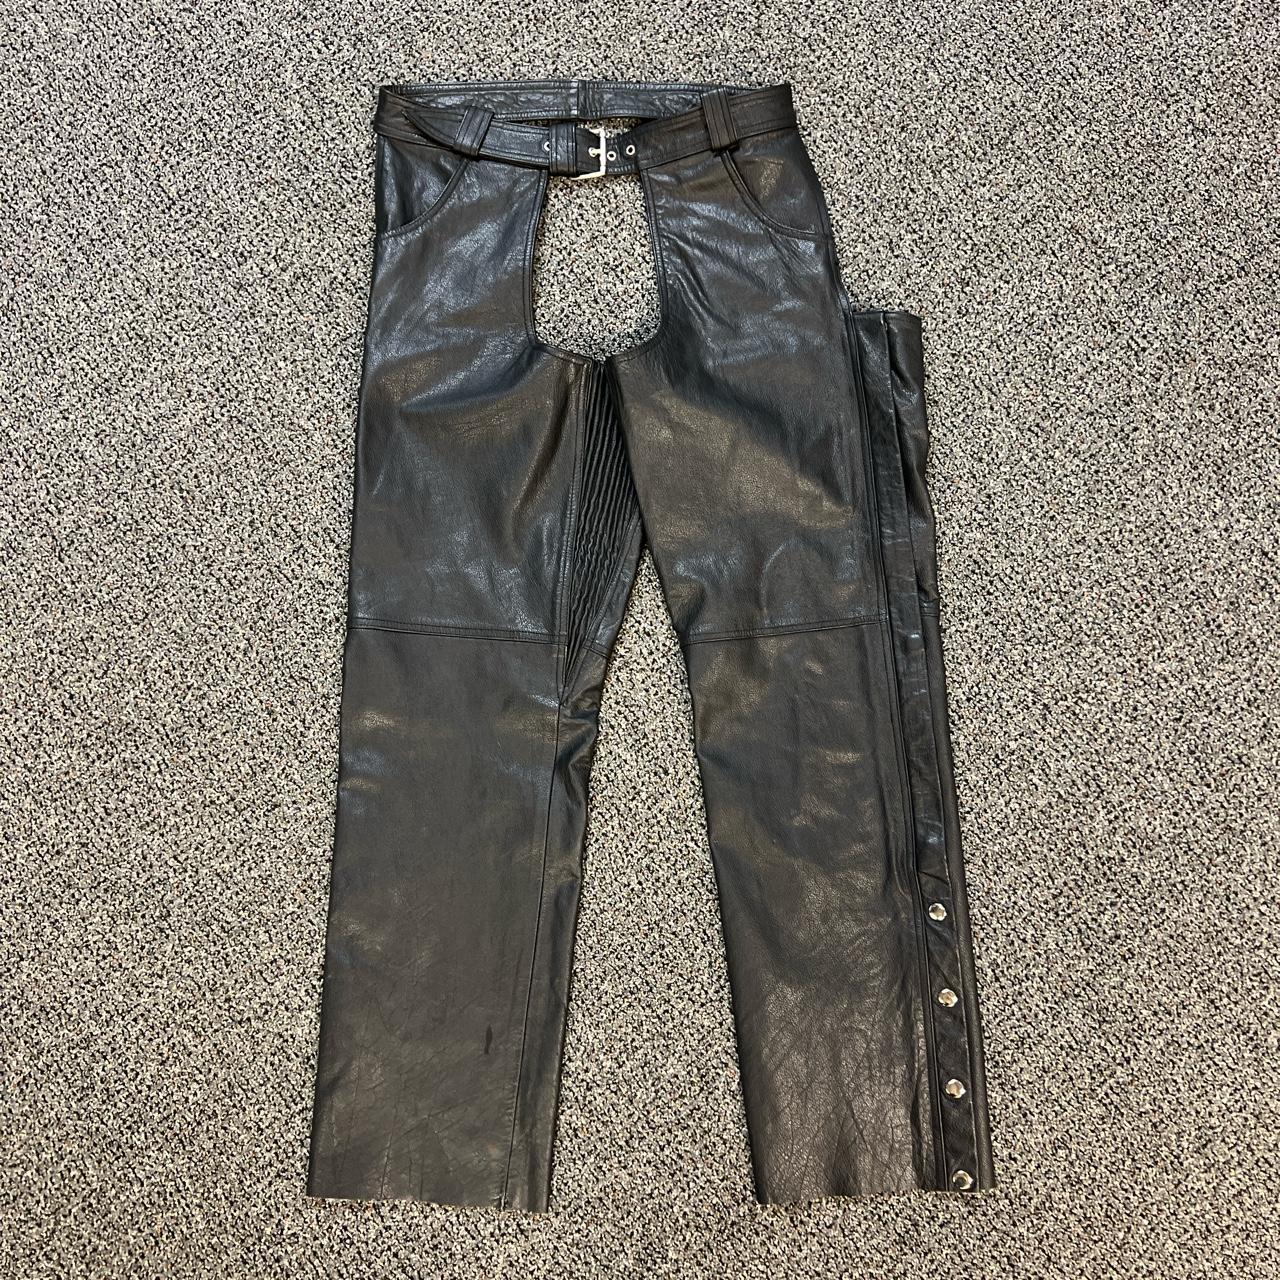 Buy Chaps for Men, Leather Chaps for Men, Assless Chaps, Chaps Clothing,  Chaps Clothing, Leather Chaps for Men, Trouser Pants Online in India - Etsy